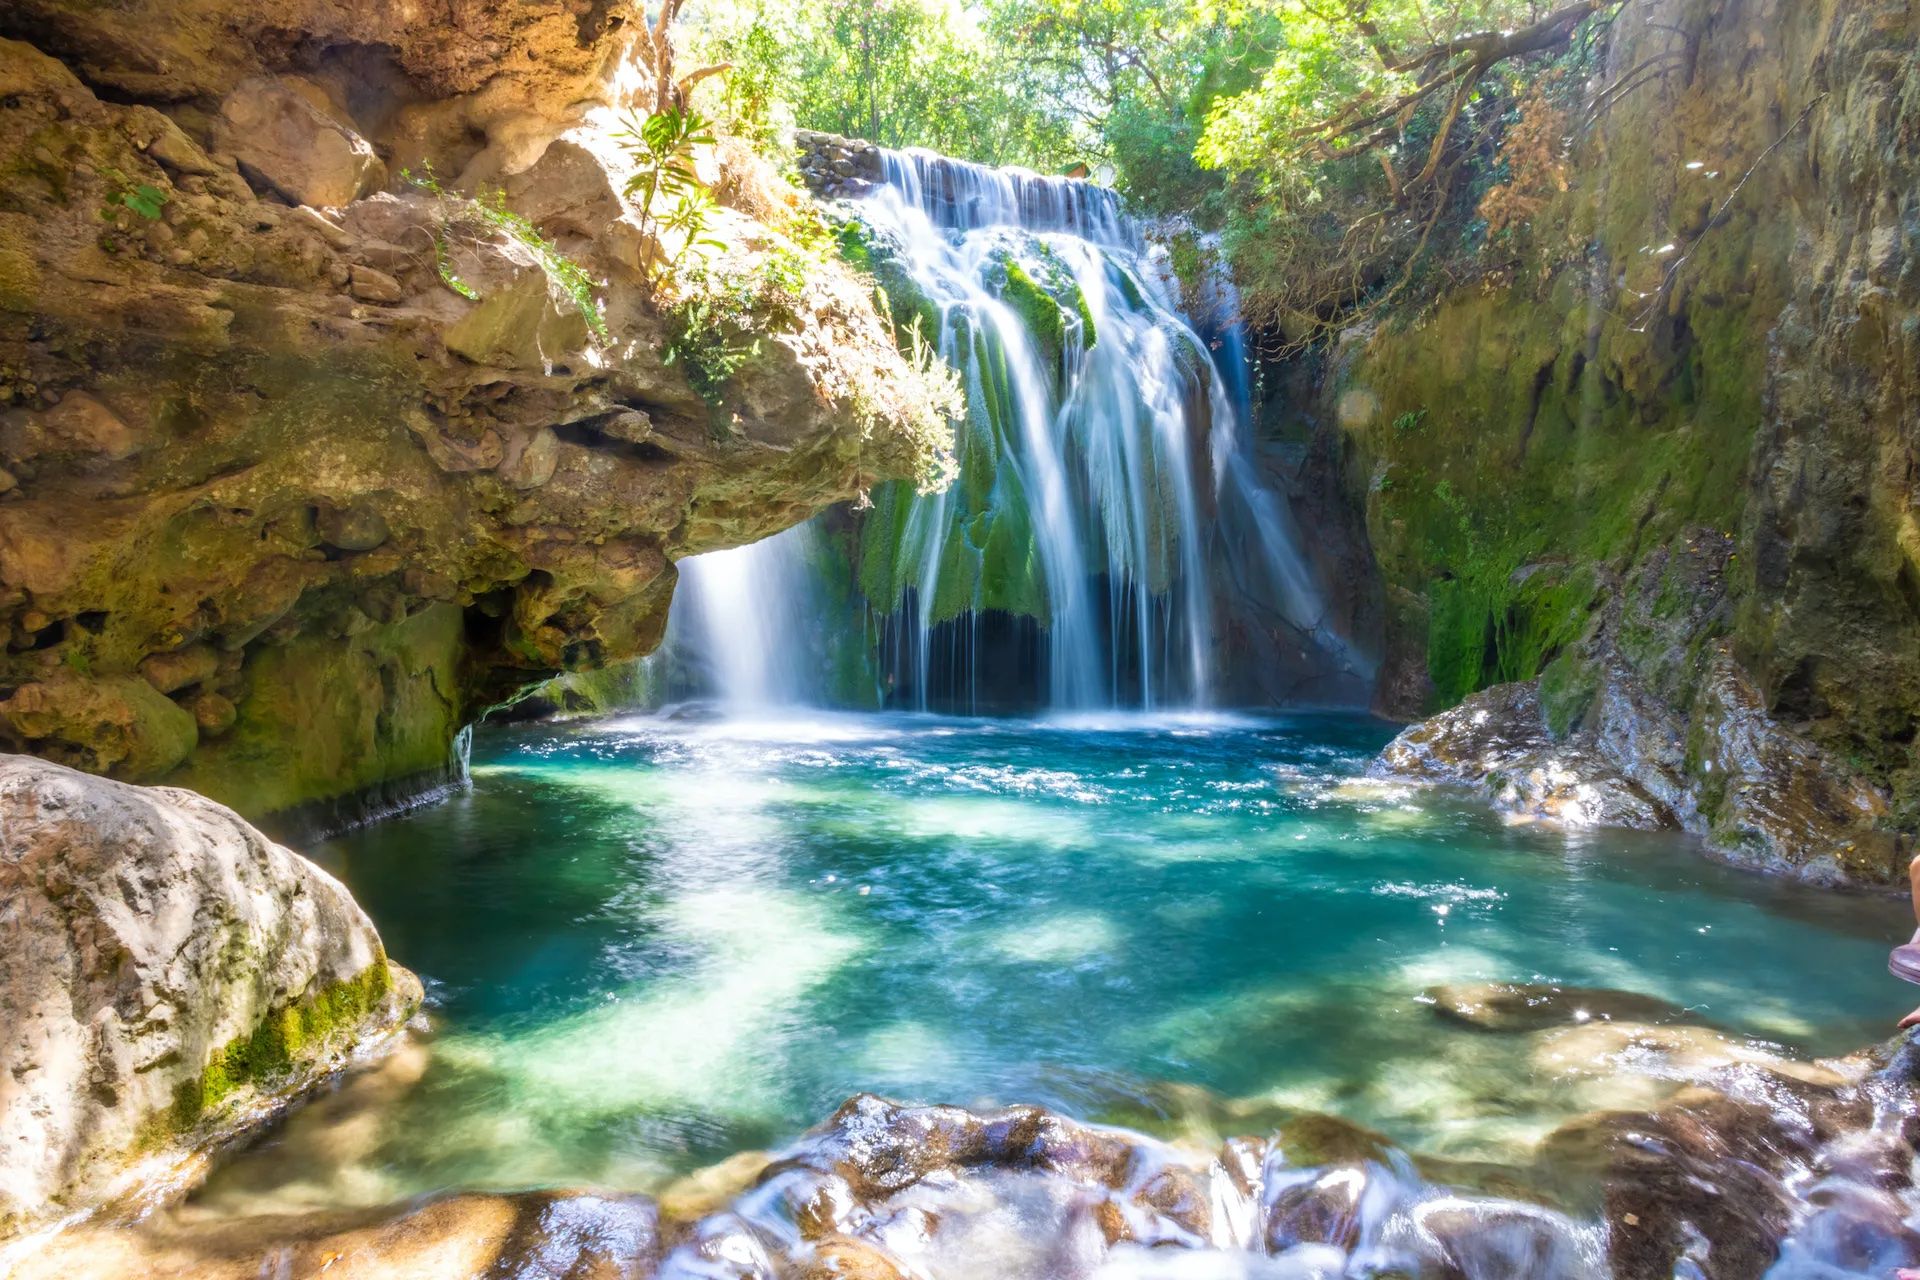 The Akchour waterfall in Morocco, cascading into a clear blue pool.